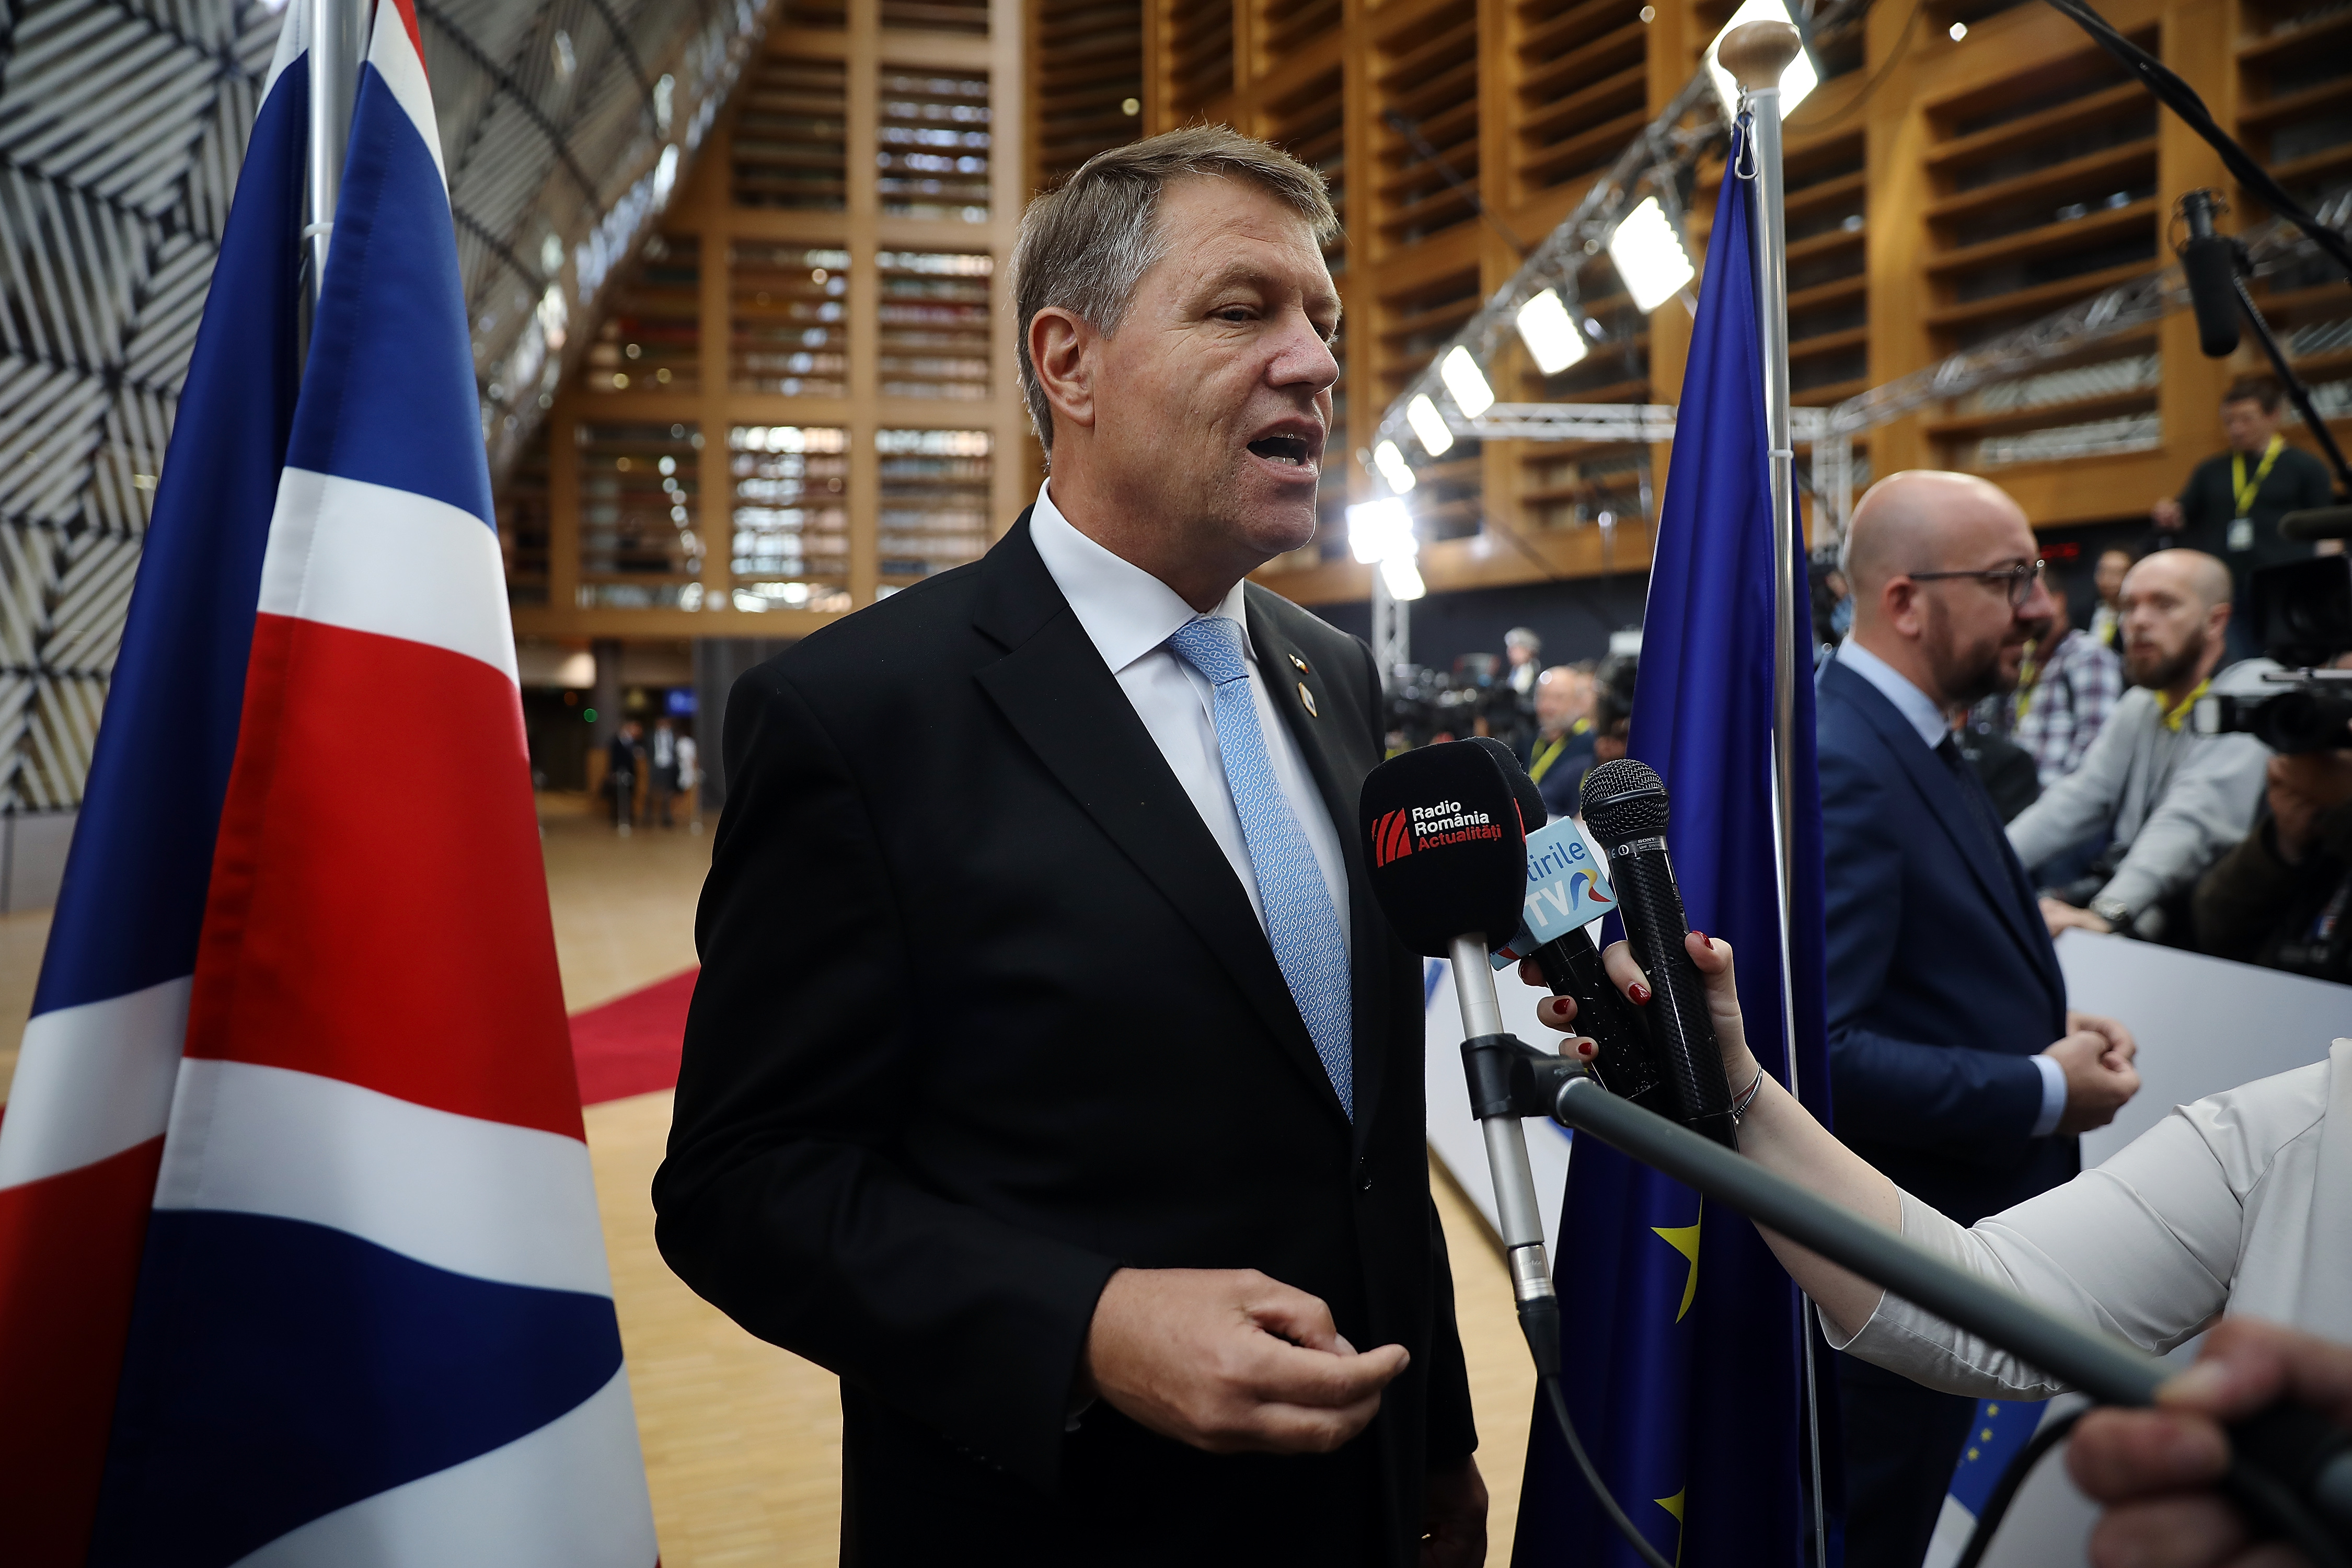 Romanian President Klaus Werner Iohannis speaks to the media as he arrives at the Council of the European Union ahead of an EU Council meeting on April 28, 2017 in Brussels, Belgium. (Dan Kitwood—Getty Images)